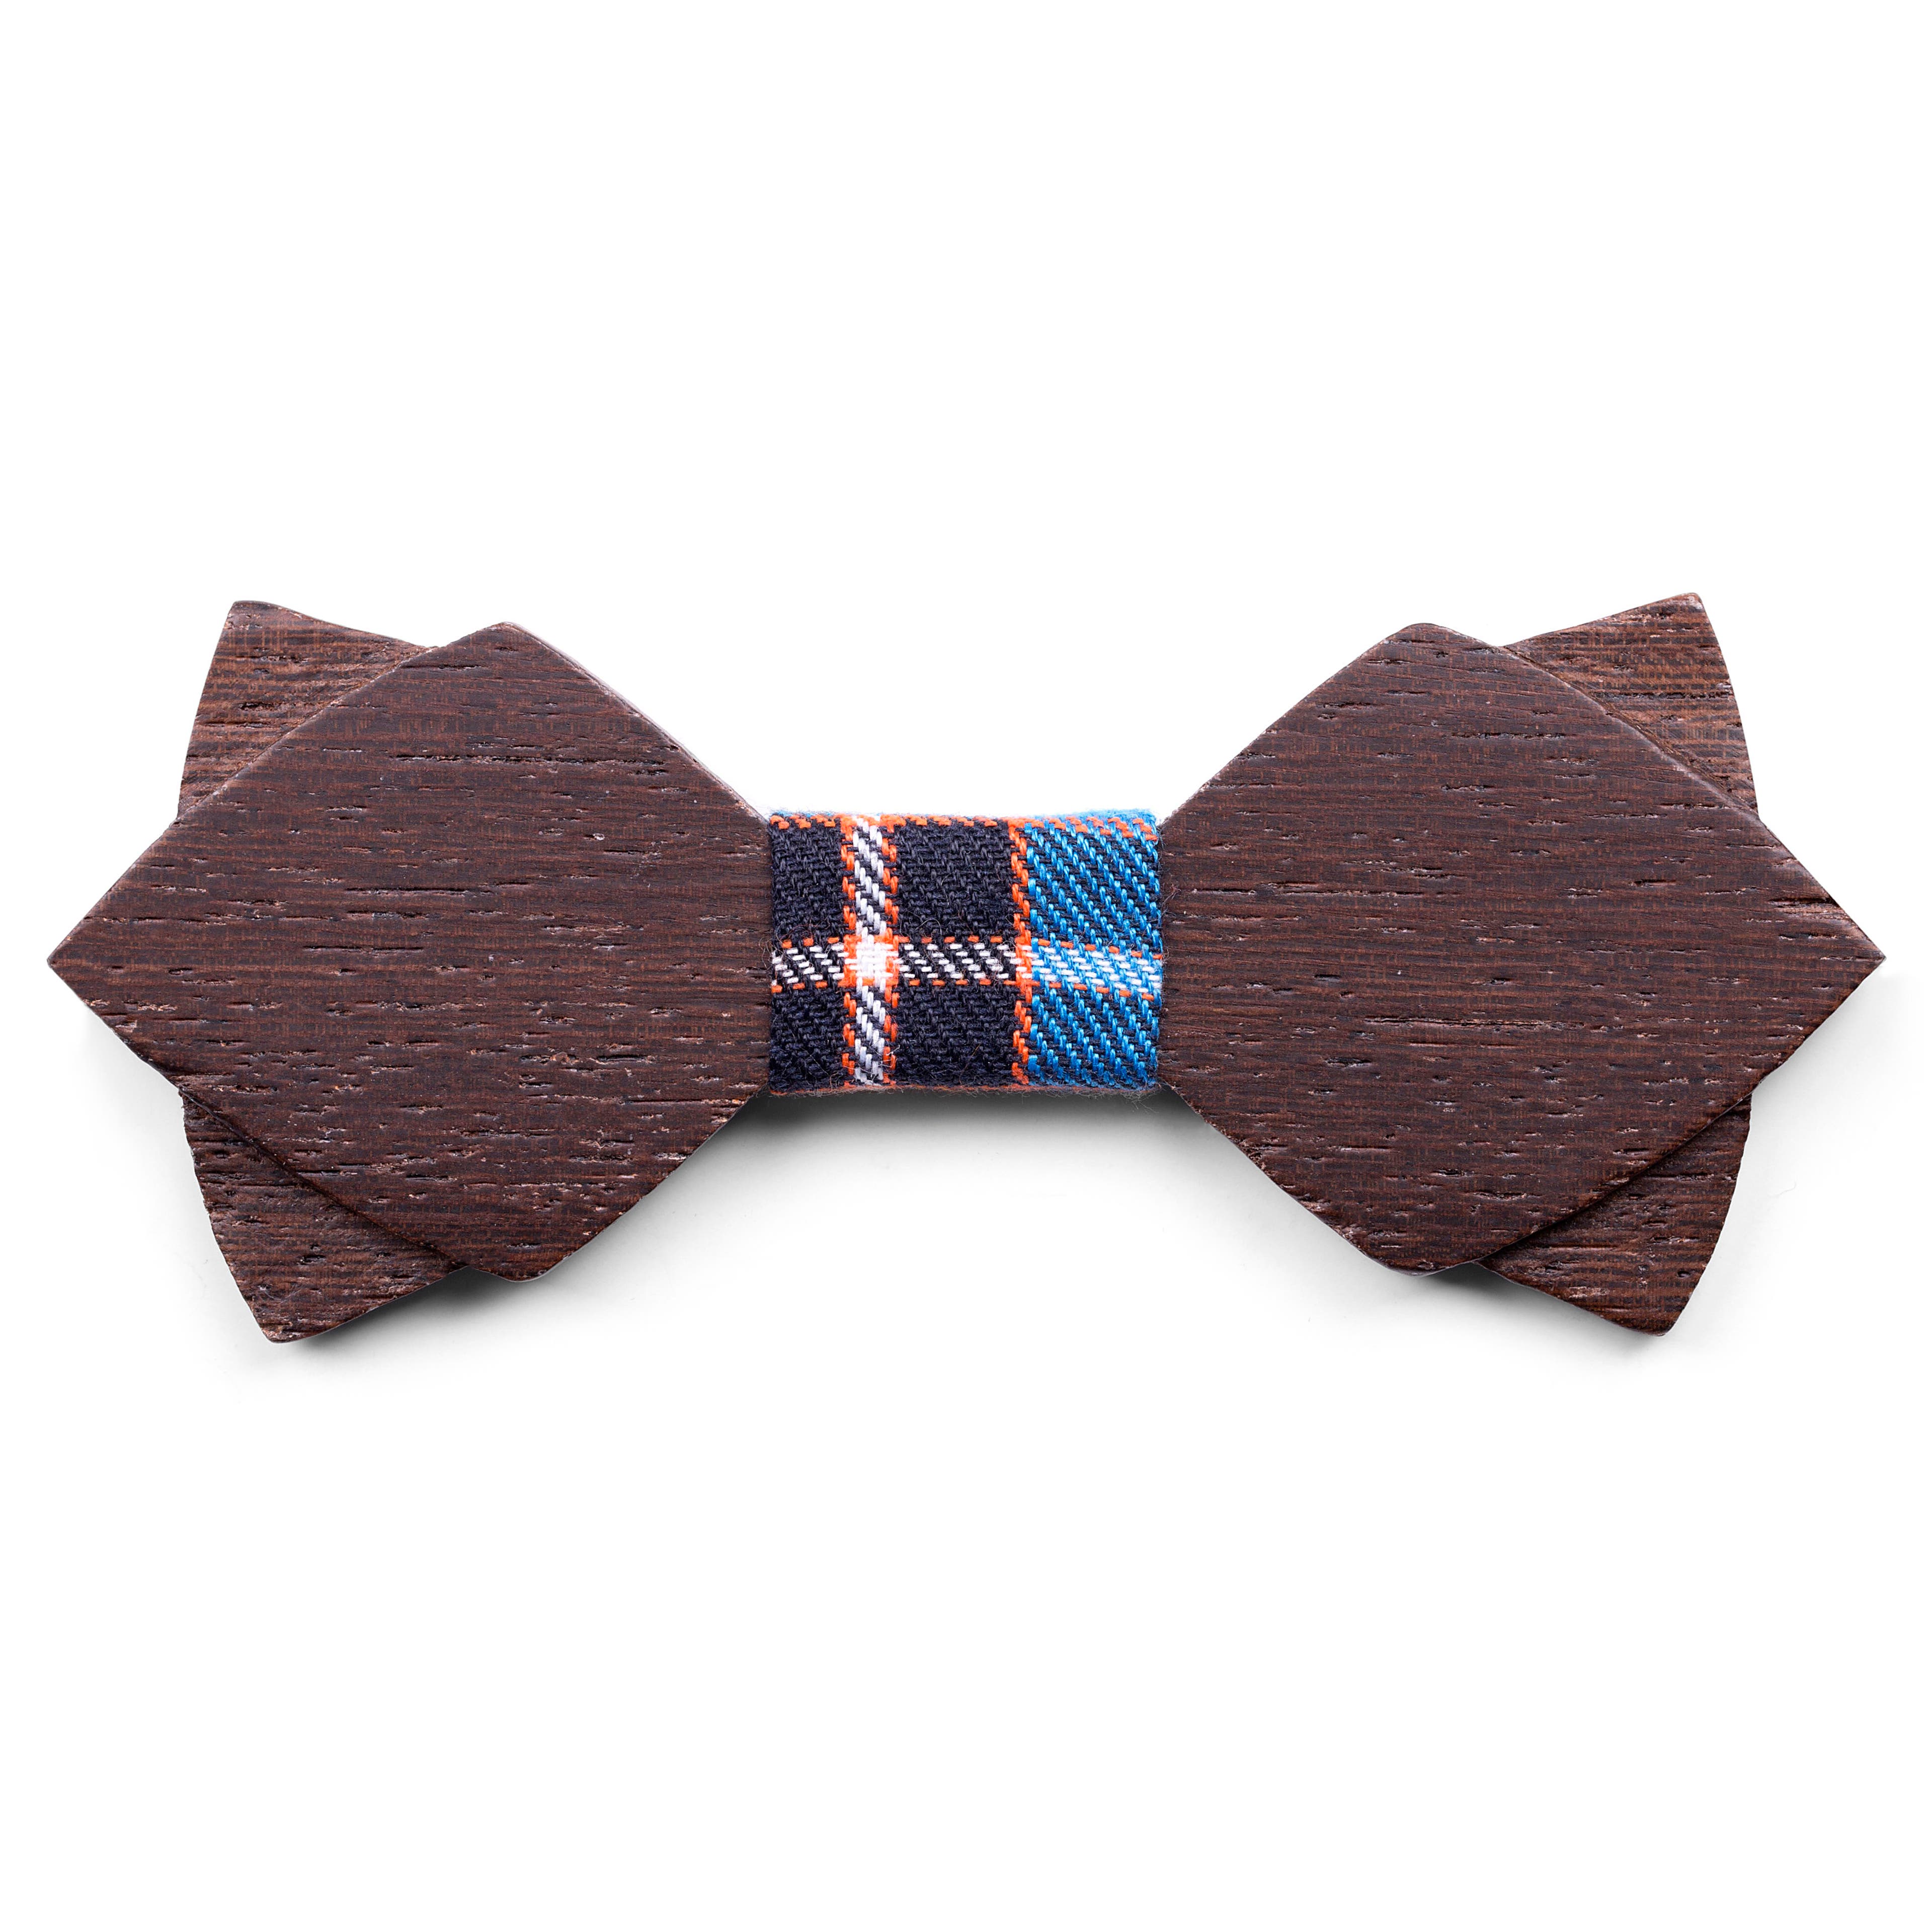 African Wenge Wood Double Wenge Bow Tie with Chequered Fabric Detail